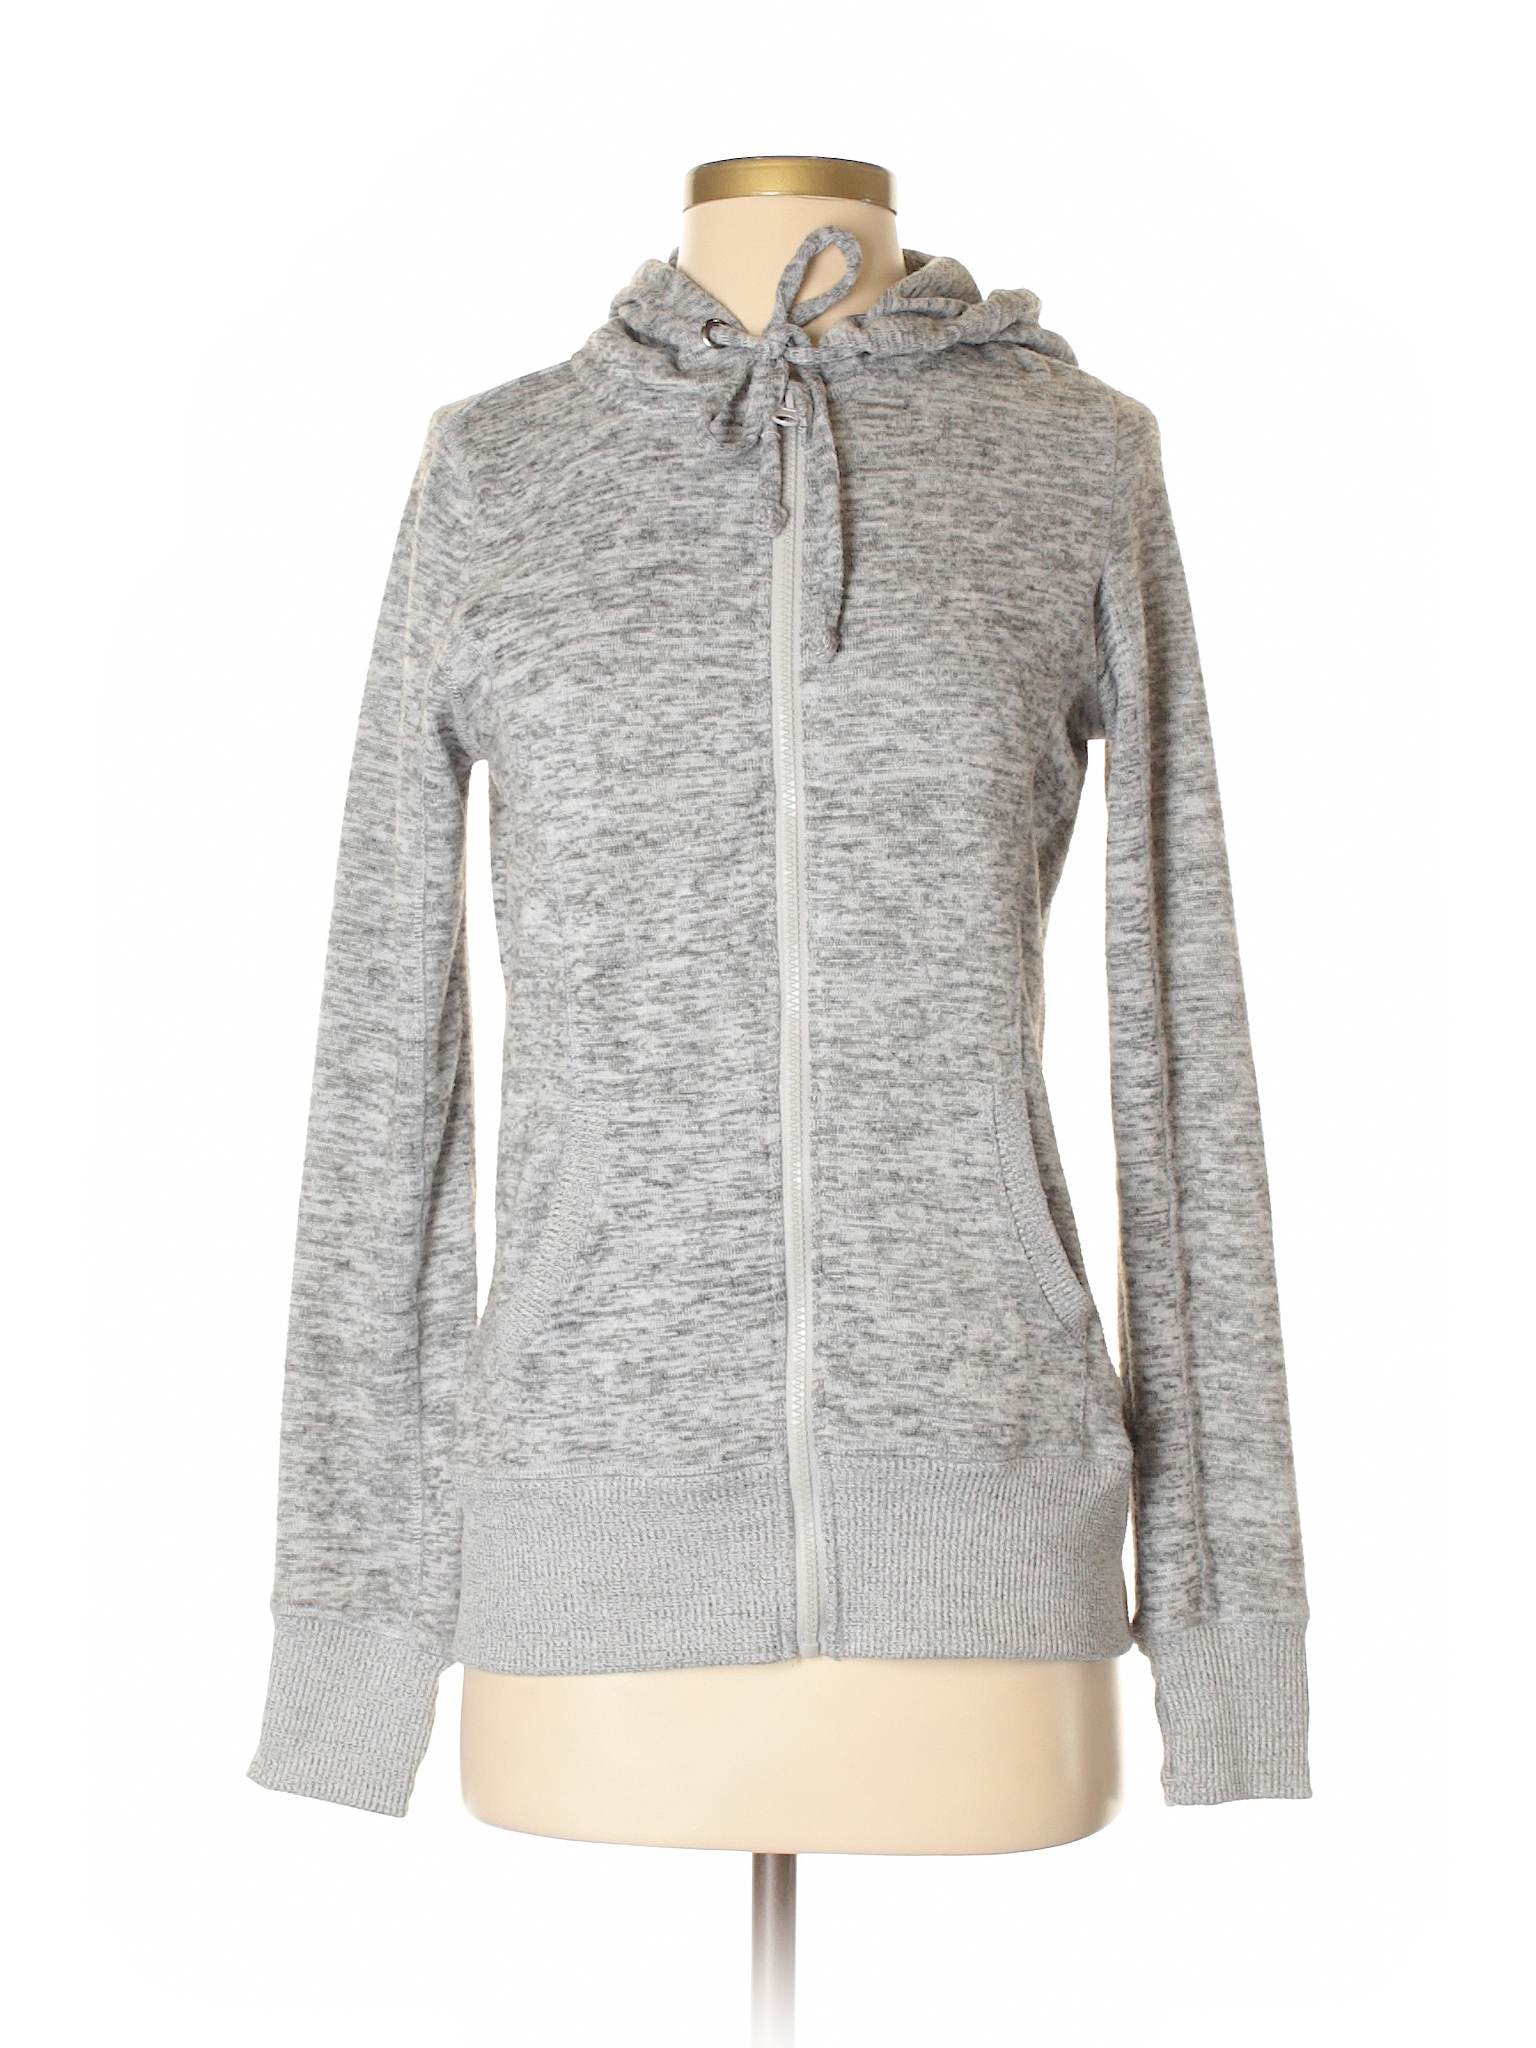 90 Degree by Reflex Solid Gray Track Jacket Size XS - 79% off | thredUP